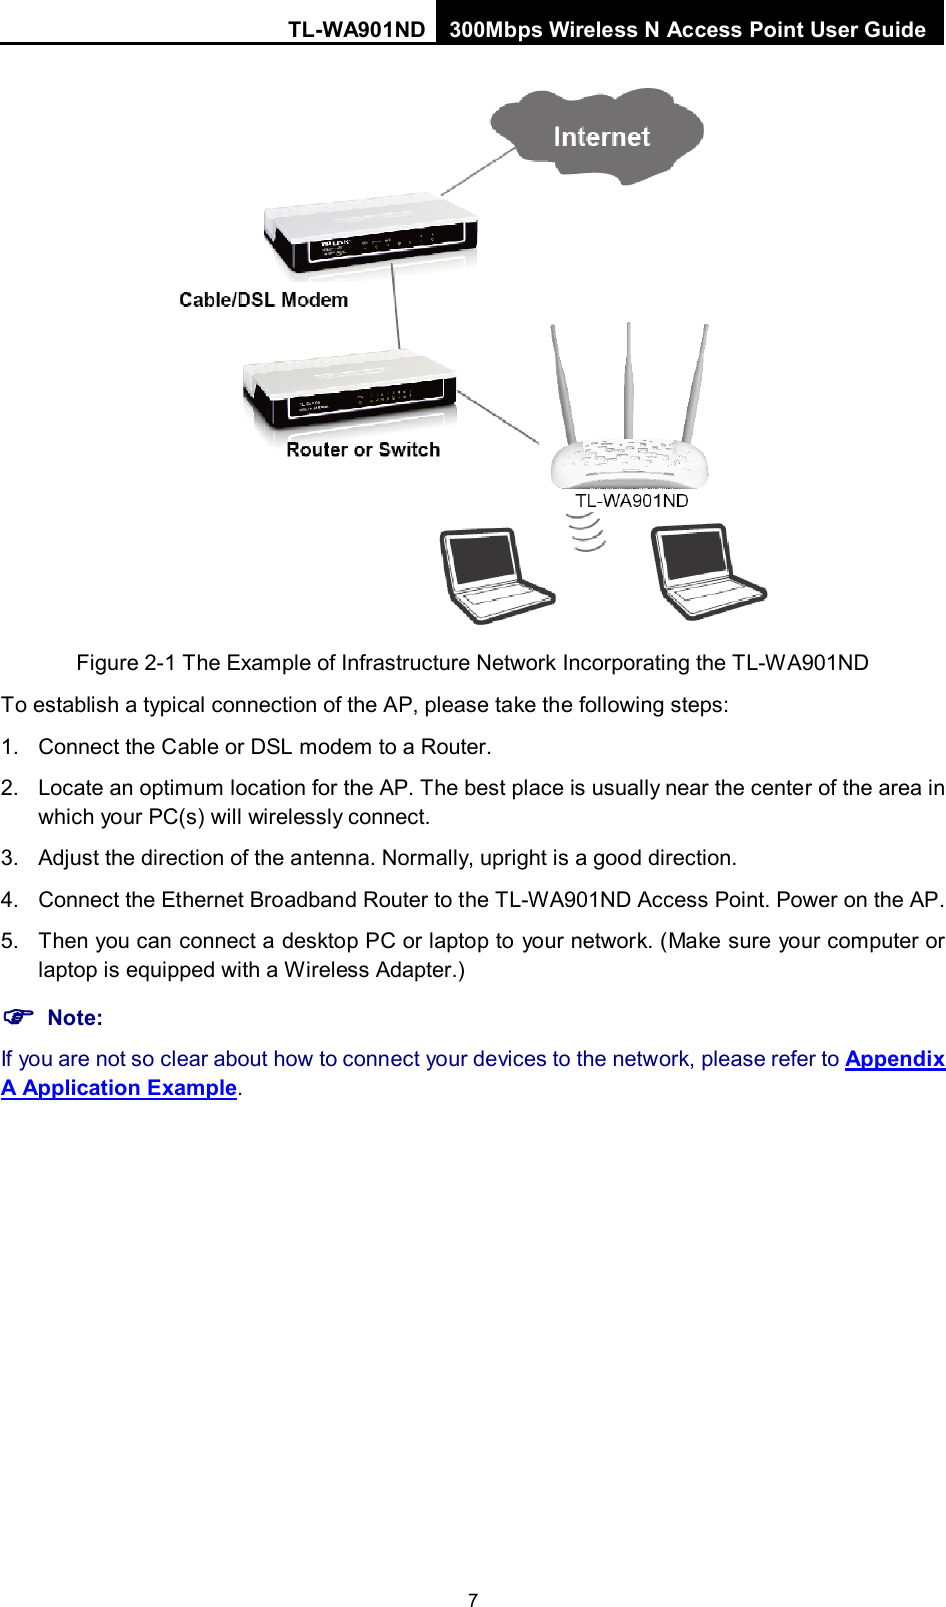 TL-WA901ND 300Mbps Wireless N Access Point User Guide  7  Figure 2-1 The Example of Infrastructure Network Incorporating the TL-WA901ND To establish a typical connection of the AP, please take the following steps: 1. Connect the Cable or DSL modem to a Router. 2. Locate an optimum location for the AP. The best place is usually near the center of the area in which your PC(s) will wirelessly connect. 3. Adjust the direction of the antenna. Normally, upright is a good direction. 4. Connect the Ethernet Broadband Router to the TL-WA901ND Access Point. Power on the AP. 5. Then you can connect a desktop PC or laptop to your network. (Make sure your computer or laptop is equipped with a Wireless Adapter.)  Note: If you are not so clear about how to connect your devices to the network, please refer to Appendix A Application Example. 